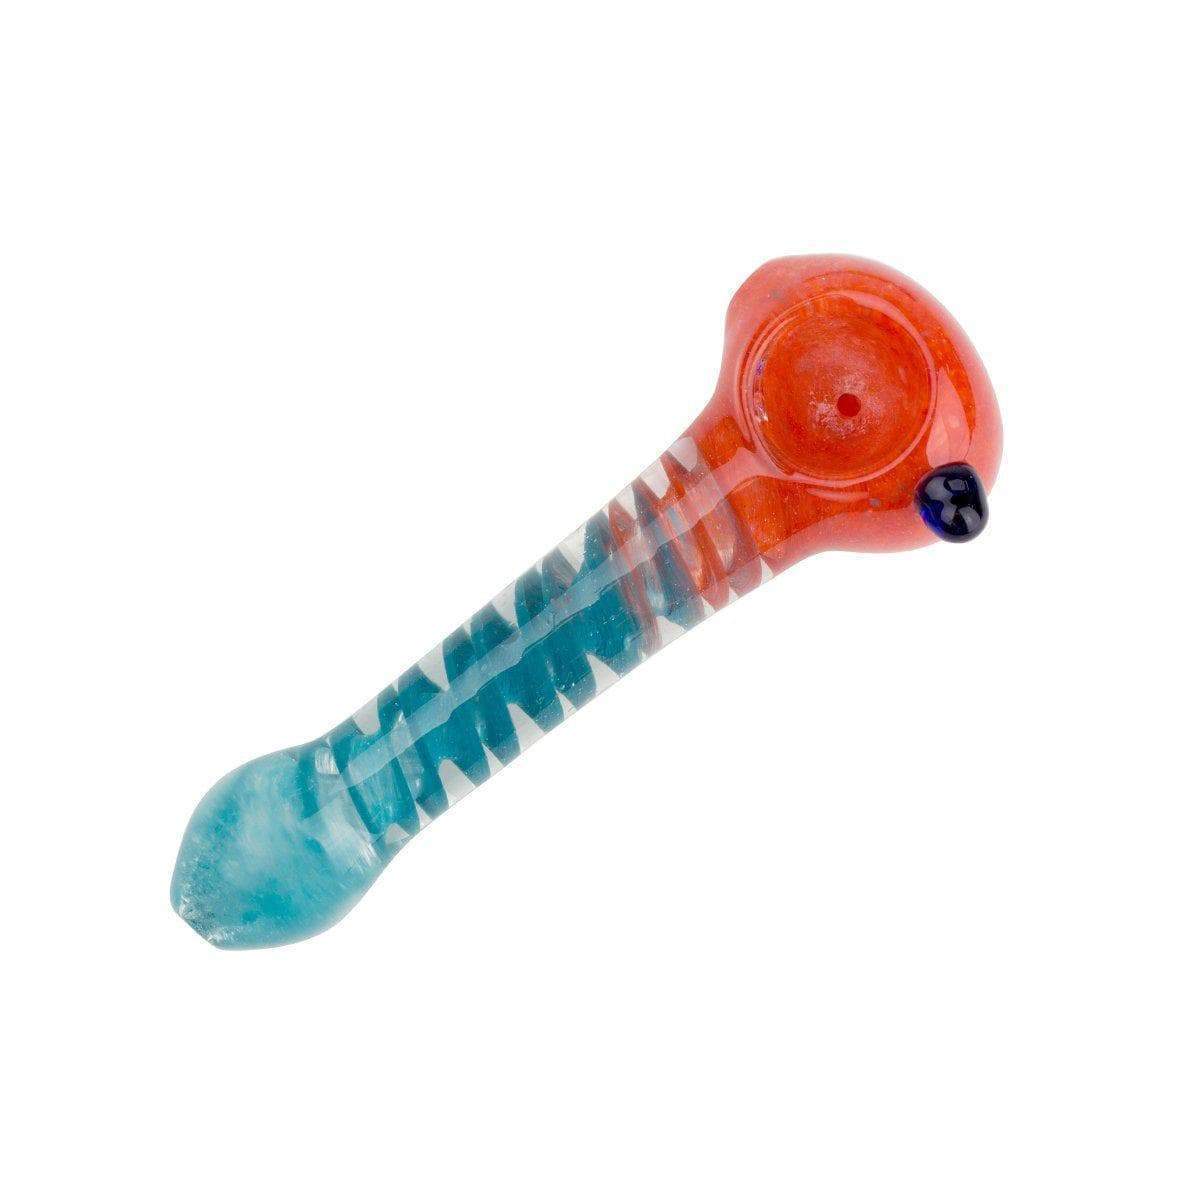 Glass Playground Pipe - 4.5in Red and Blue